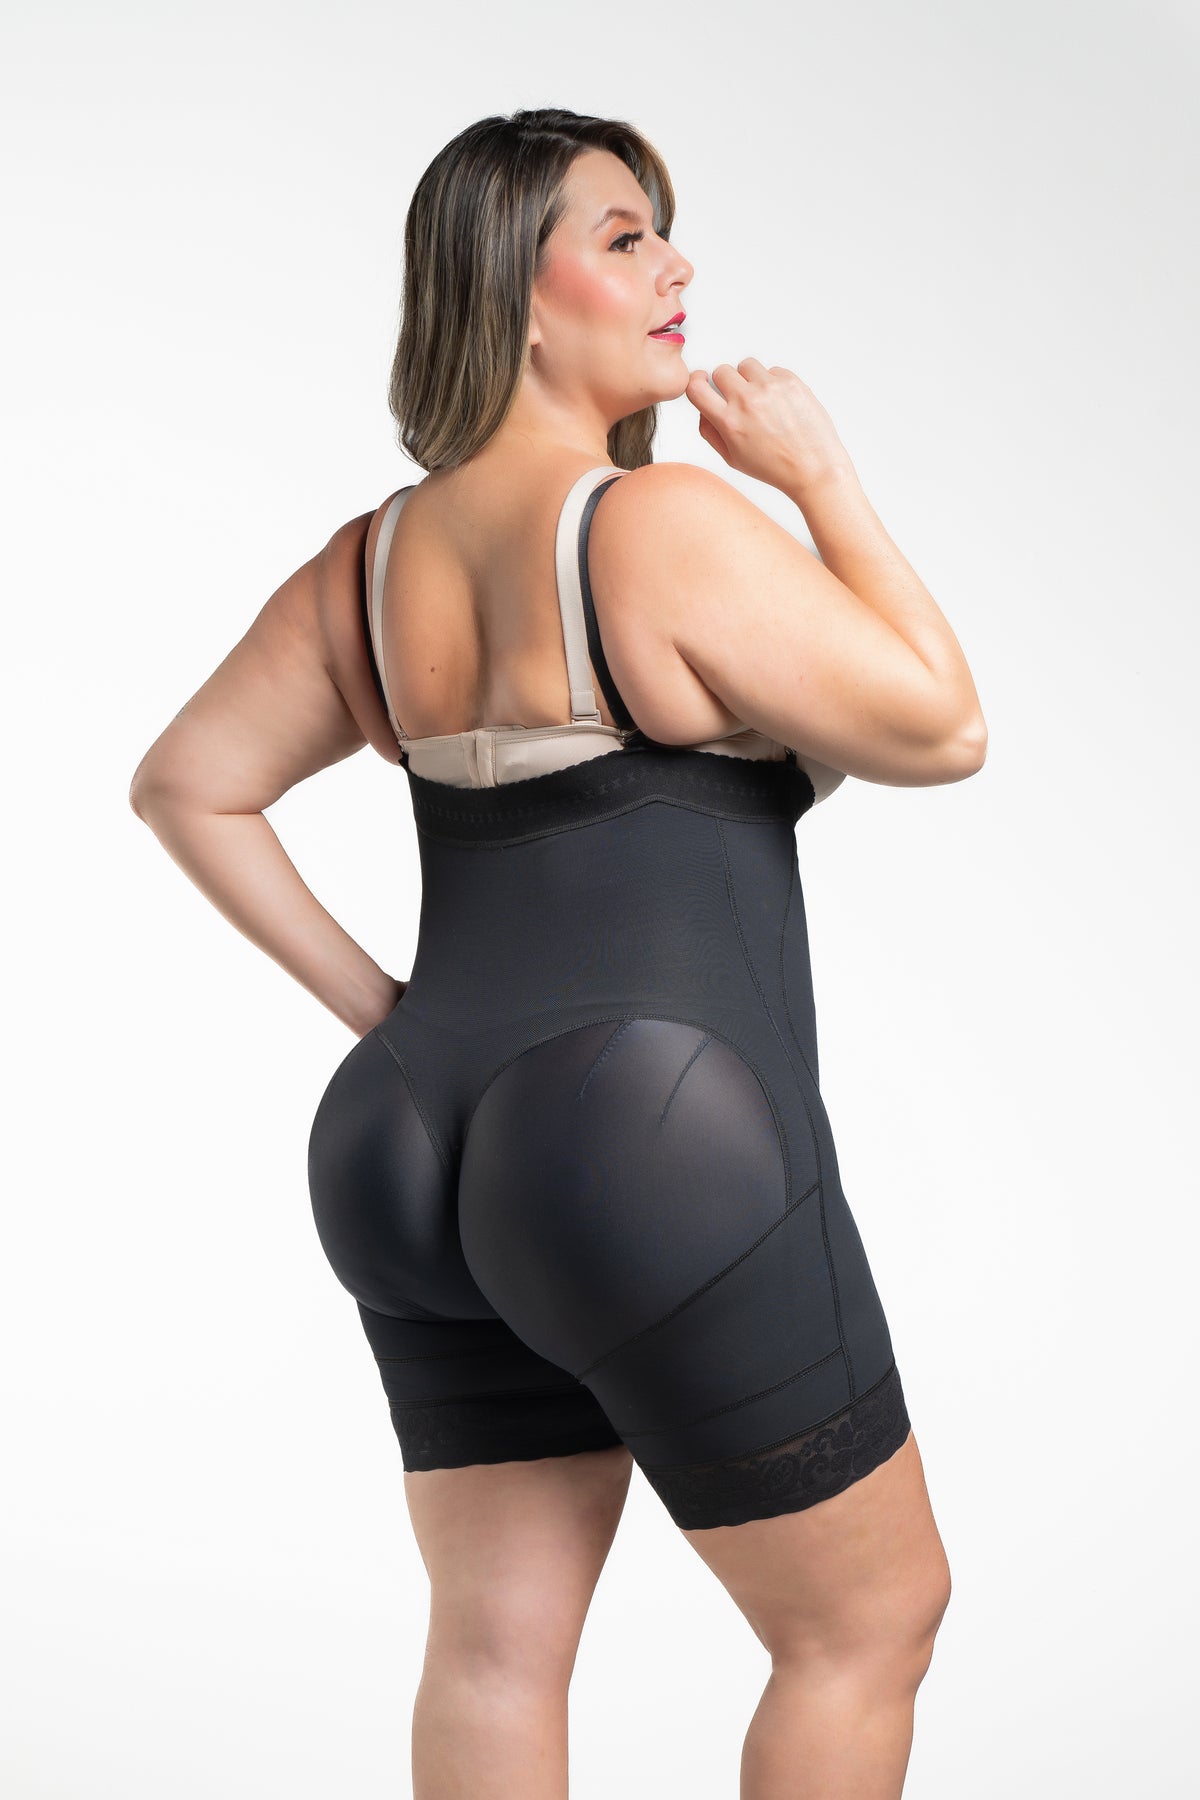 Strapless Butt Lifting Girdle - Mid Tight | HS1018